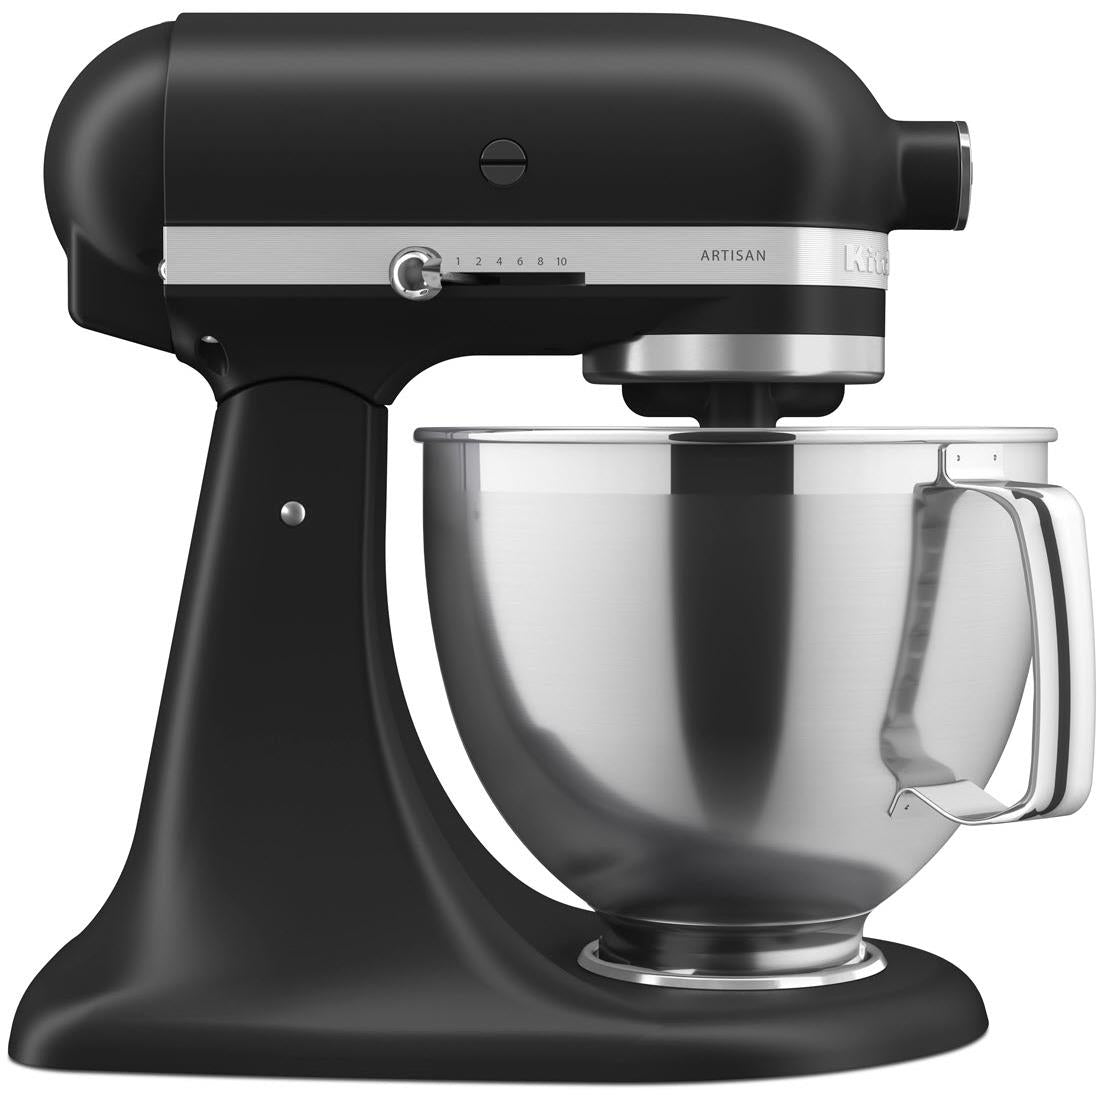 Visible Stand Mixer Cover Compatible With 68 Qt Kitchenaid Mixer